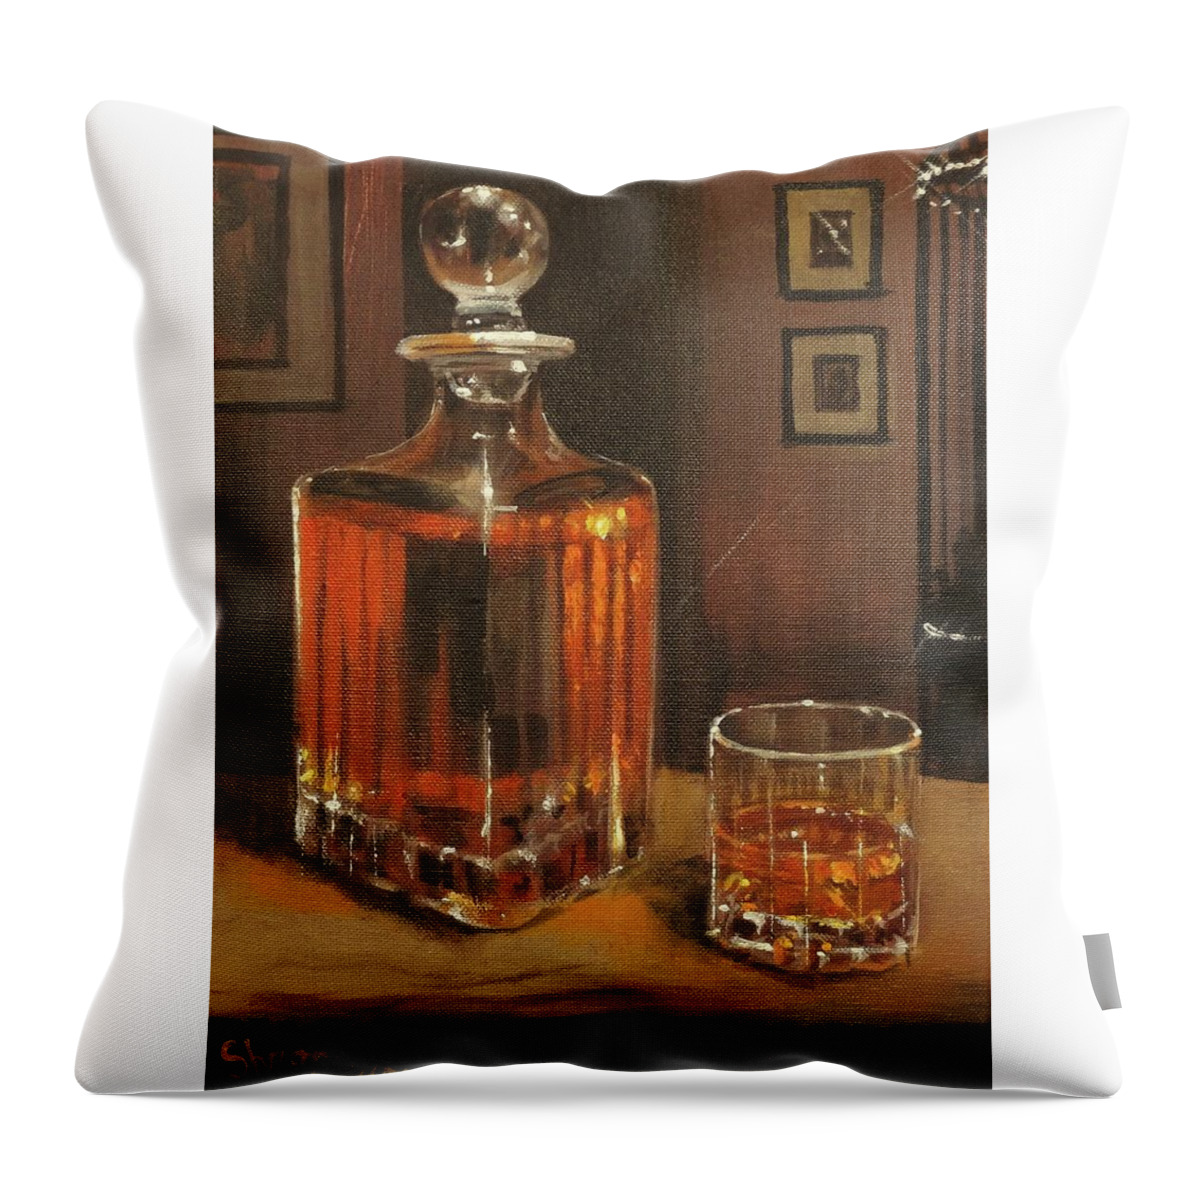 Bourbon Throw Pillow featuring the painting Bourbon Break by Tom Shropshire